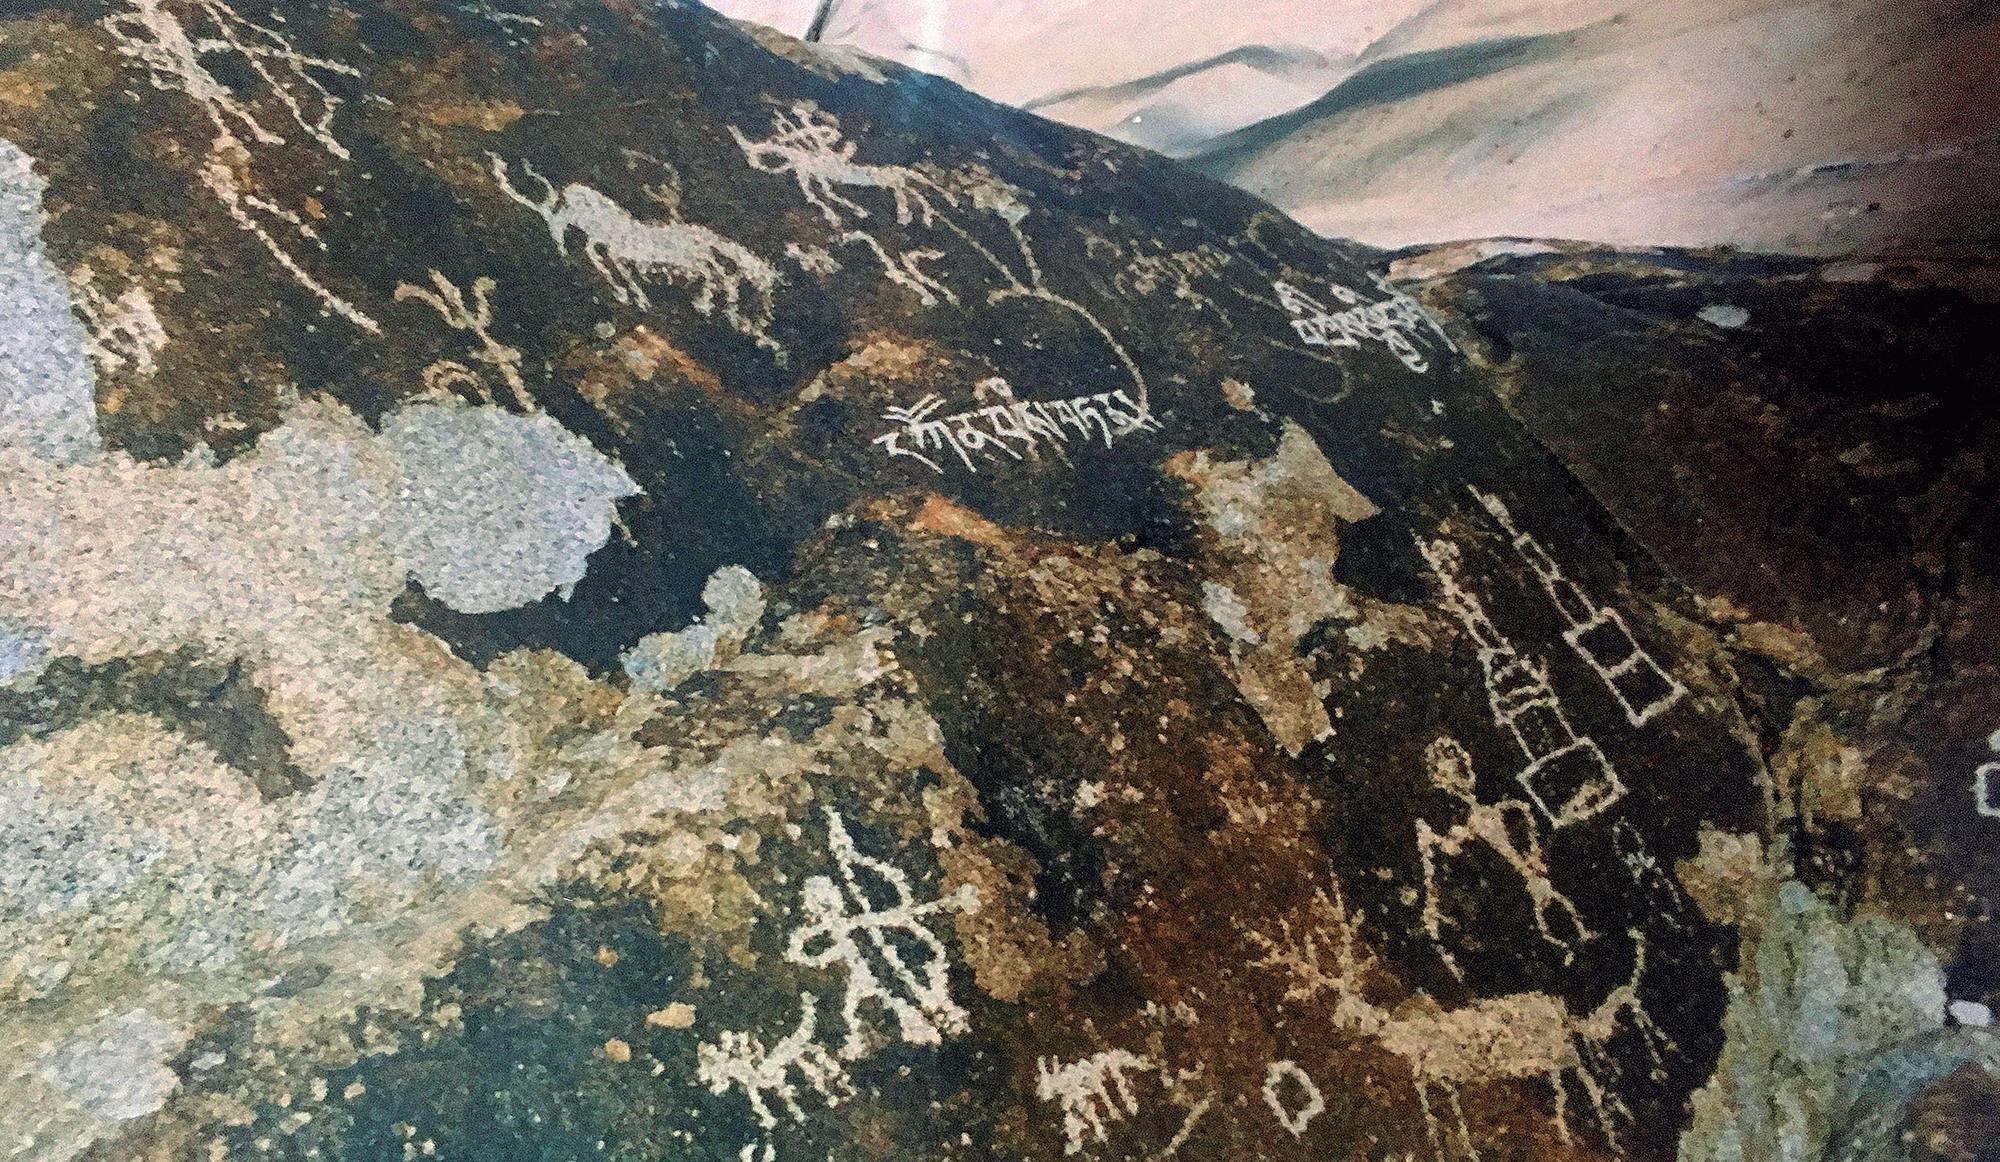 A big rock engraved with diverse motifs from different periods. The earliest ones nearly disappear under patina but the later ones are visible with some superimpositions. Such as yak, stag, sheep, hunters with bow and arrow, horse rider, trident, chortans/stupa and also script.